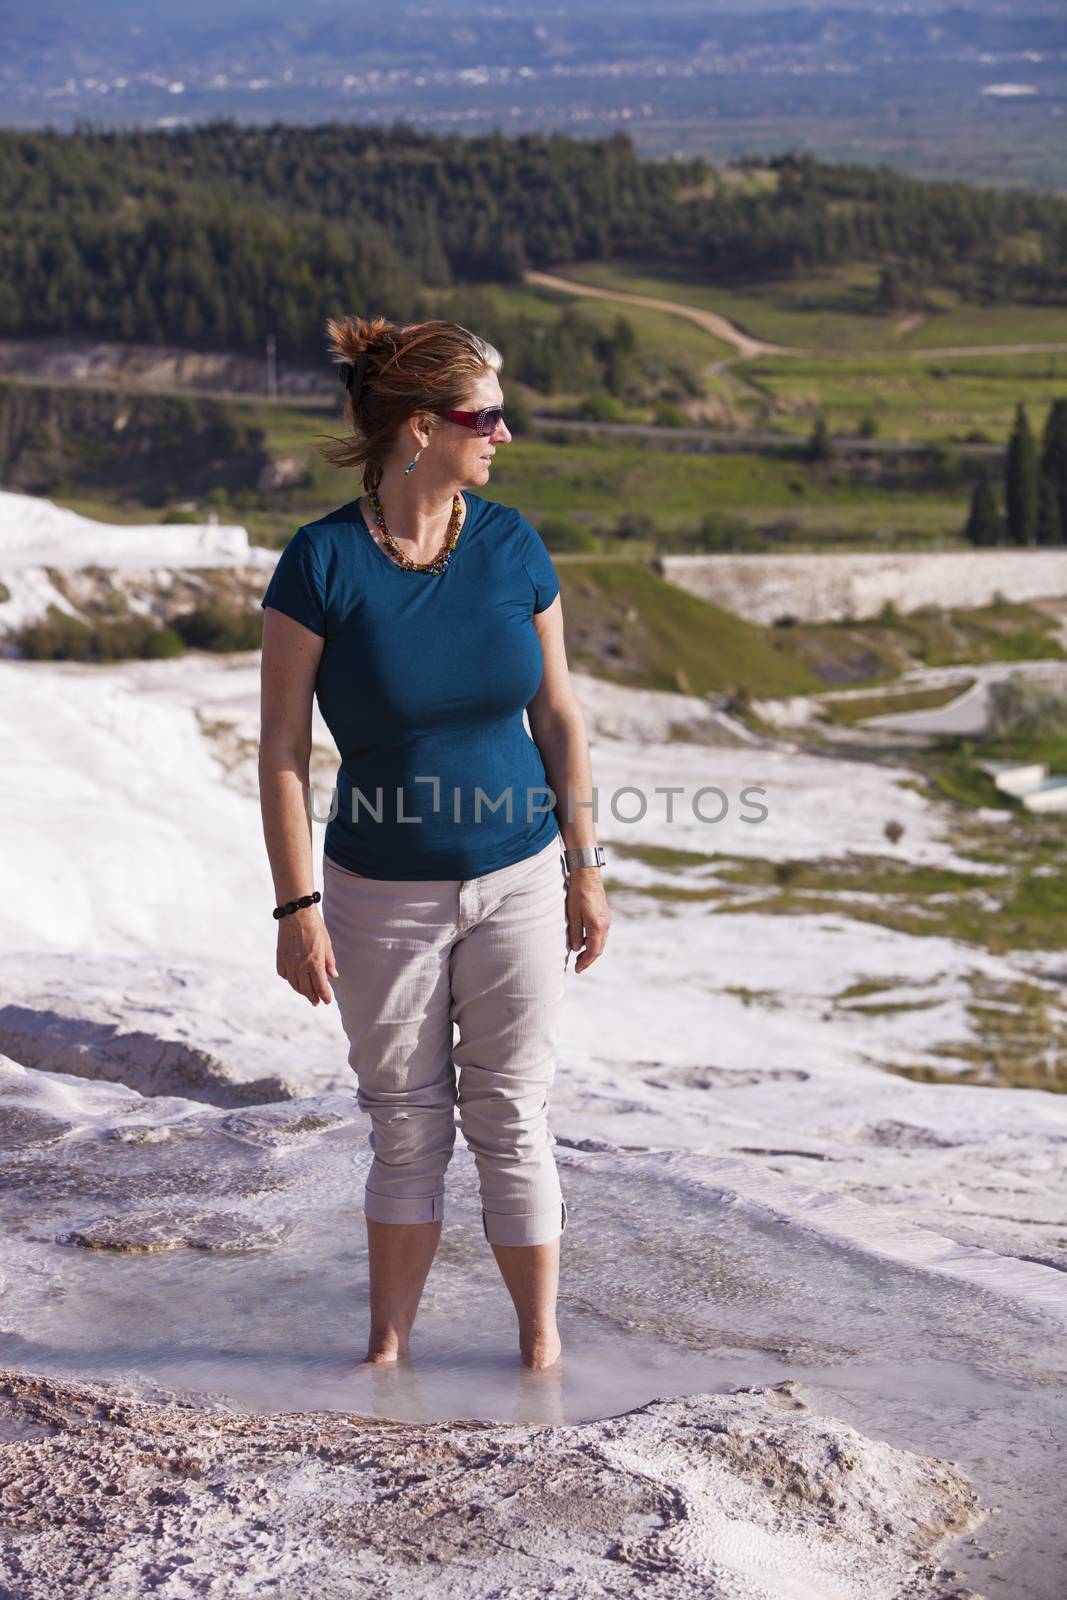 Pretty woman tourist wading in hot springs pool at Pamukkale